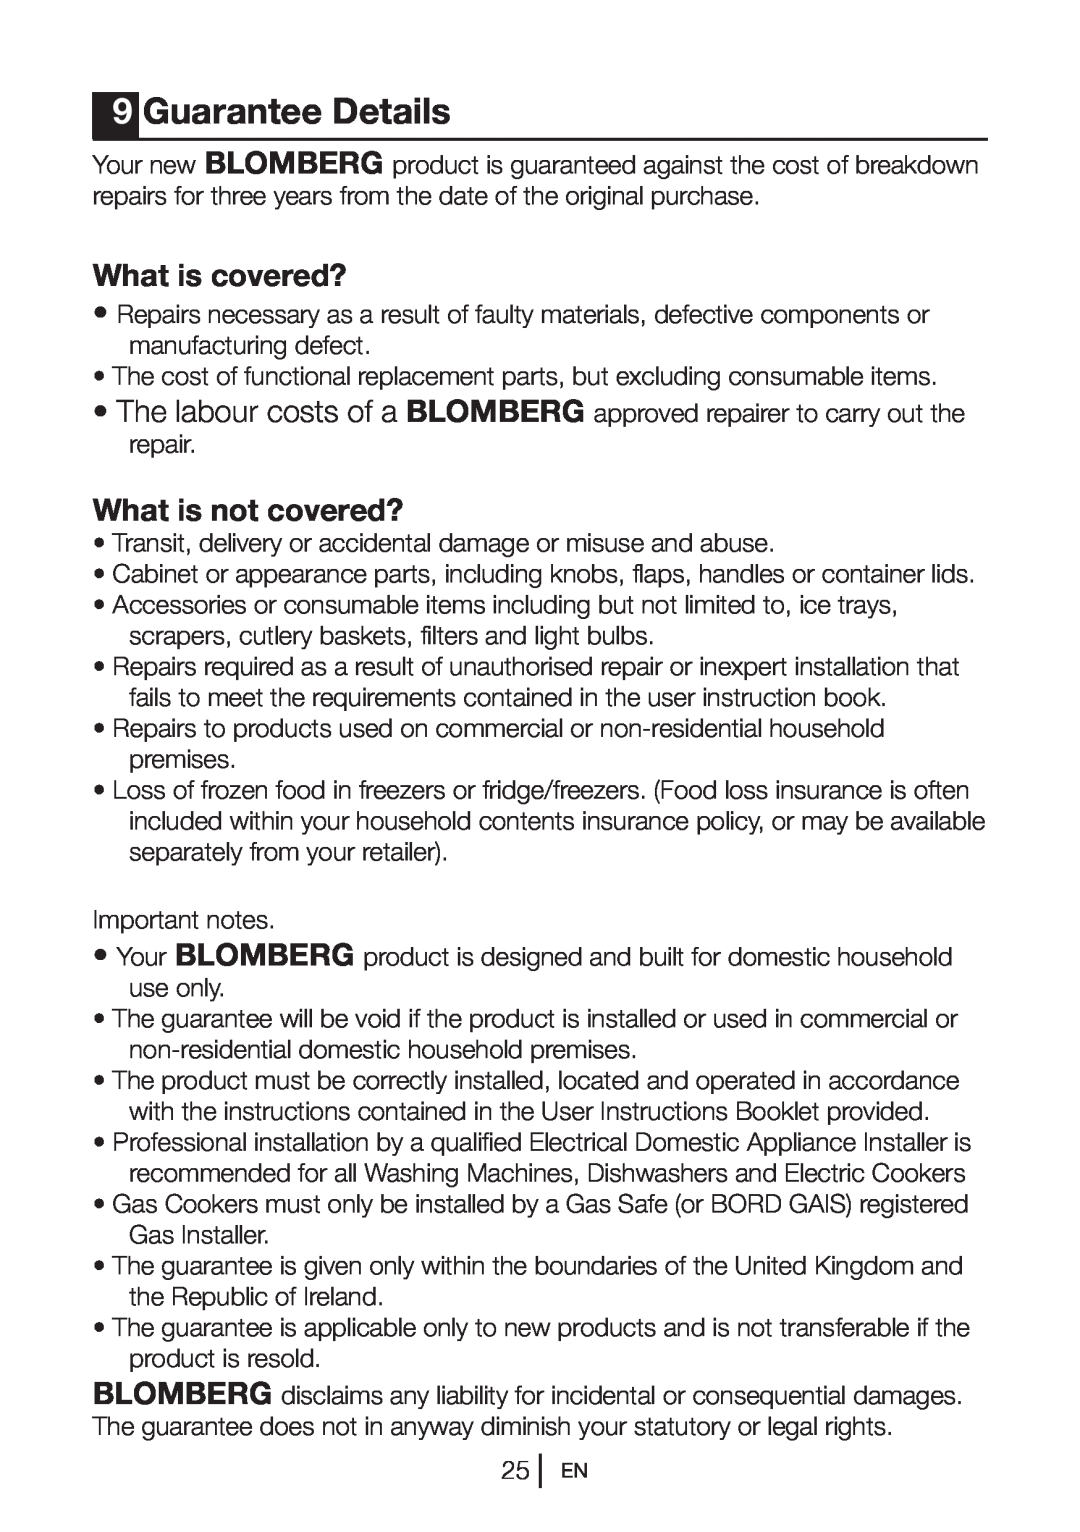 Blomberg KGM 9690 PX manual Guarantee Details, What is covered?, What is not covered? 